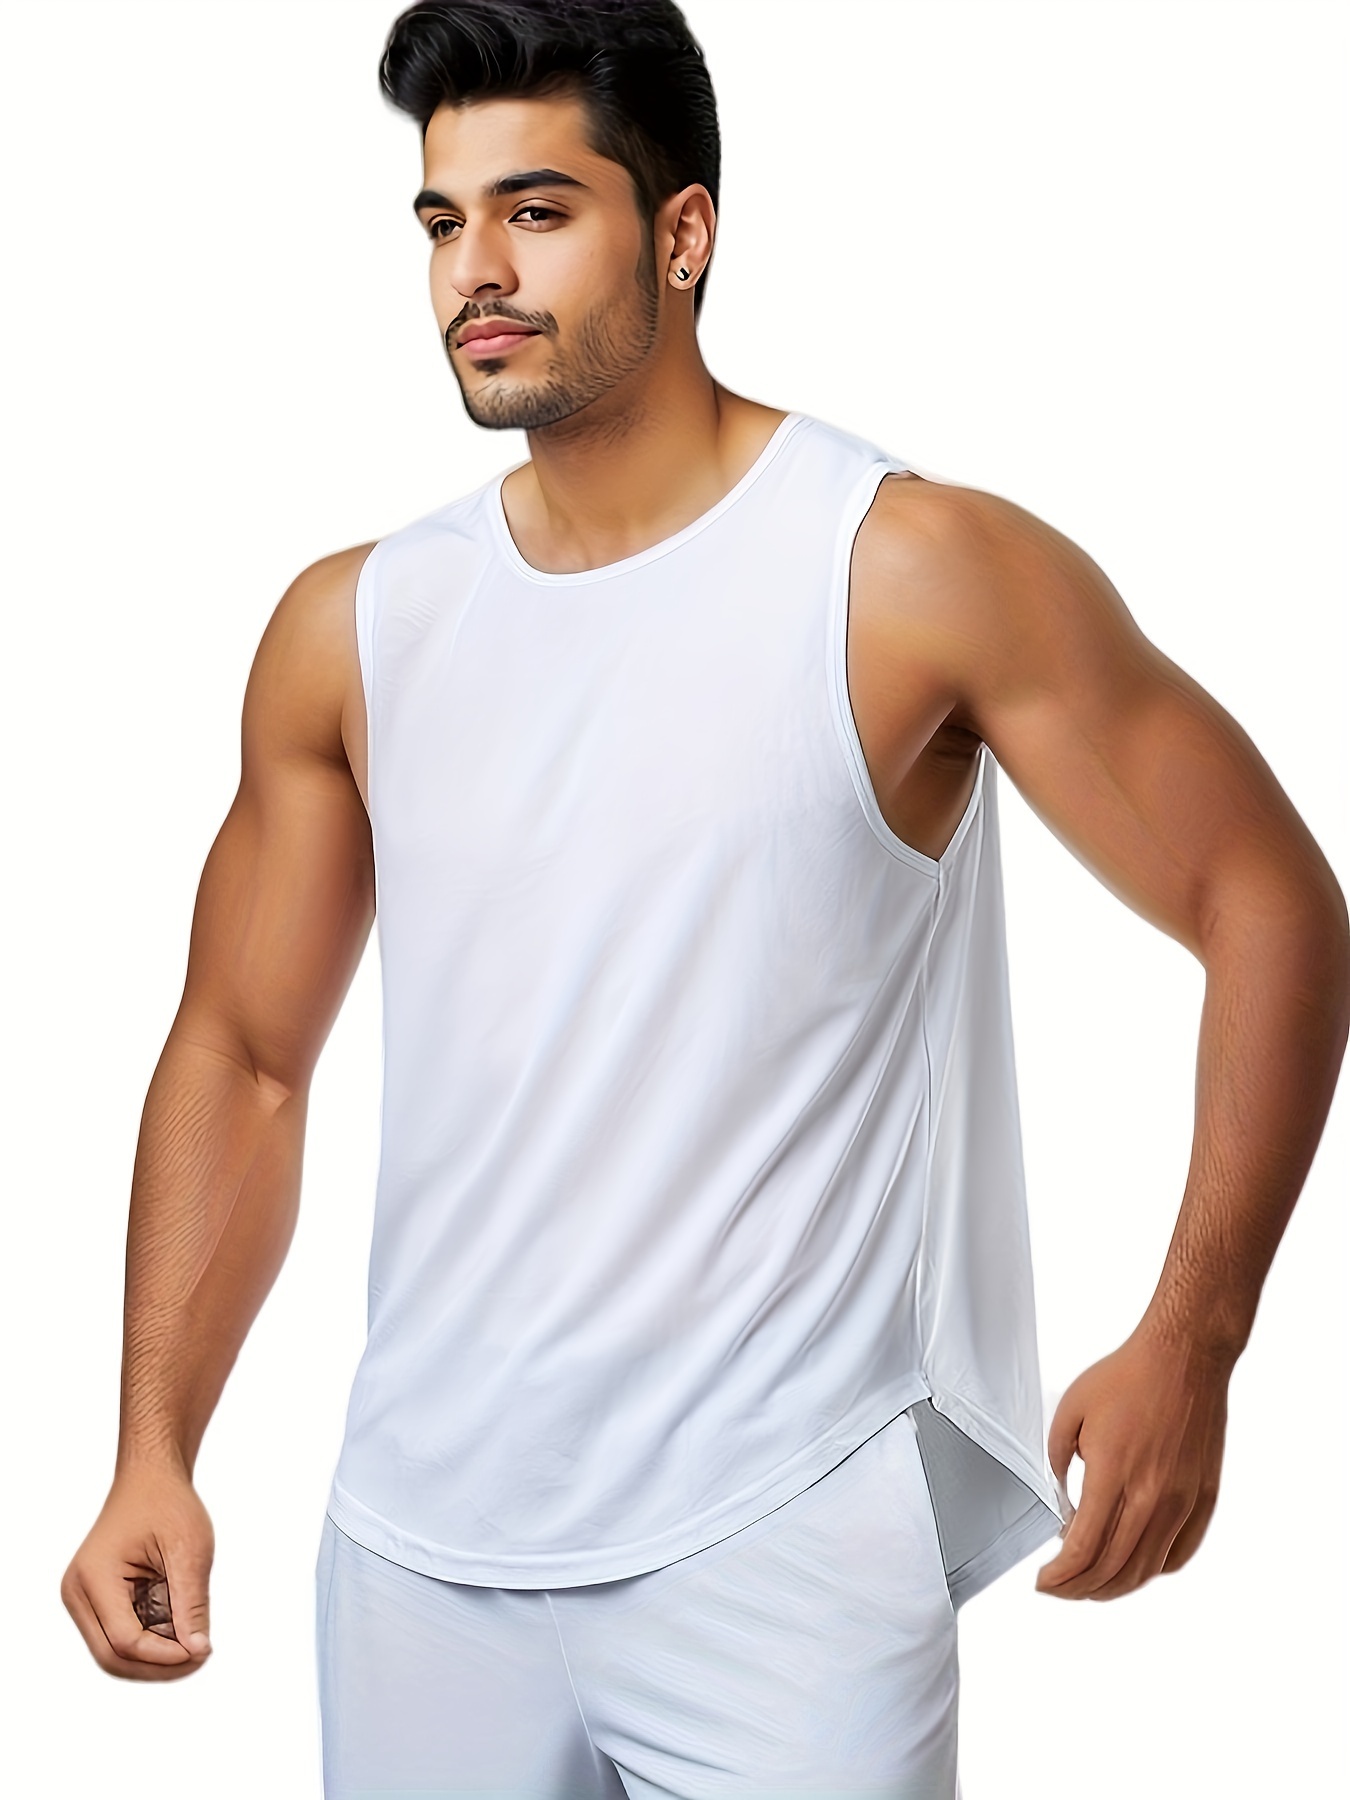 Mens Muscle Tank Tops Quick Dry Vest Fitness Workout/Gym Sports Singlet  Shirts